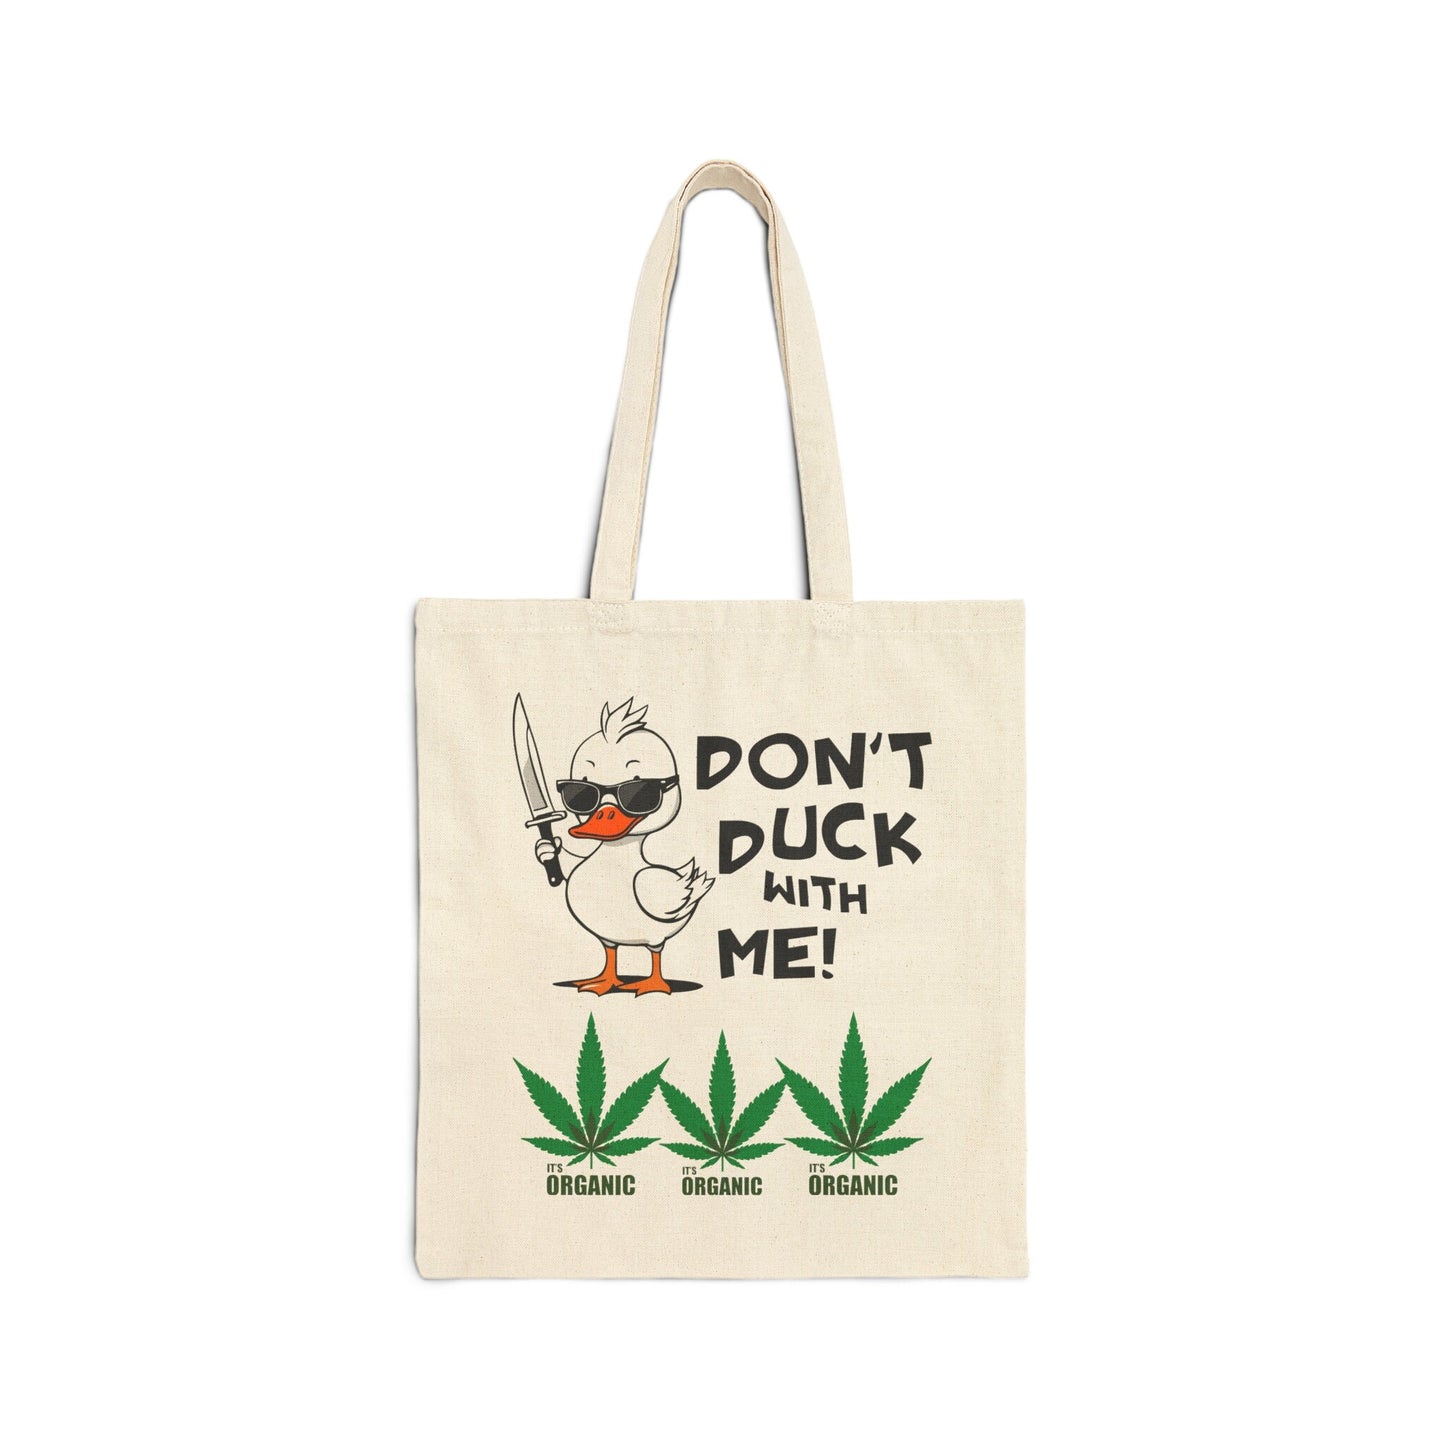 Don't Duck with Me Funny Cotton Canvas Tote Bag, Reusable Grocery Bag, Gift for Friend, Funny Tote Bag, Ecofriendly Organic Tote Bag